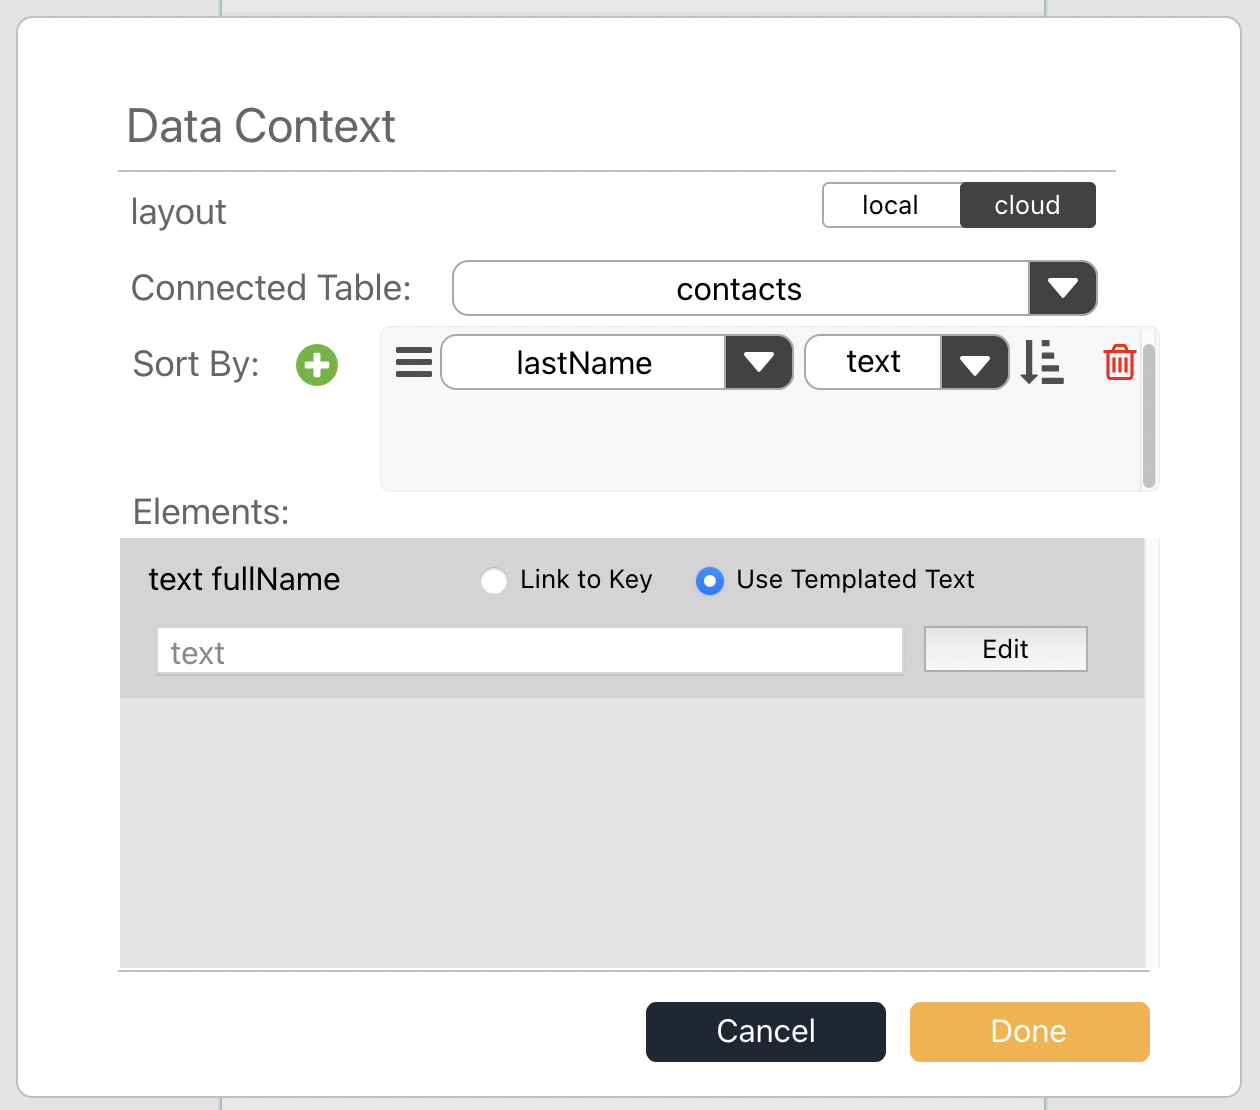 Initial data context setup for the layout